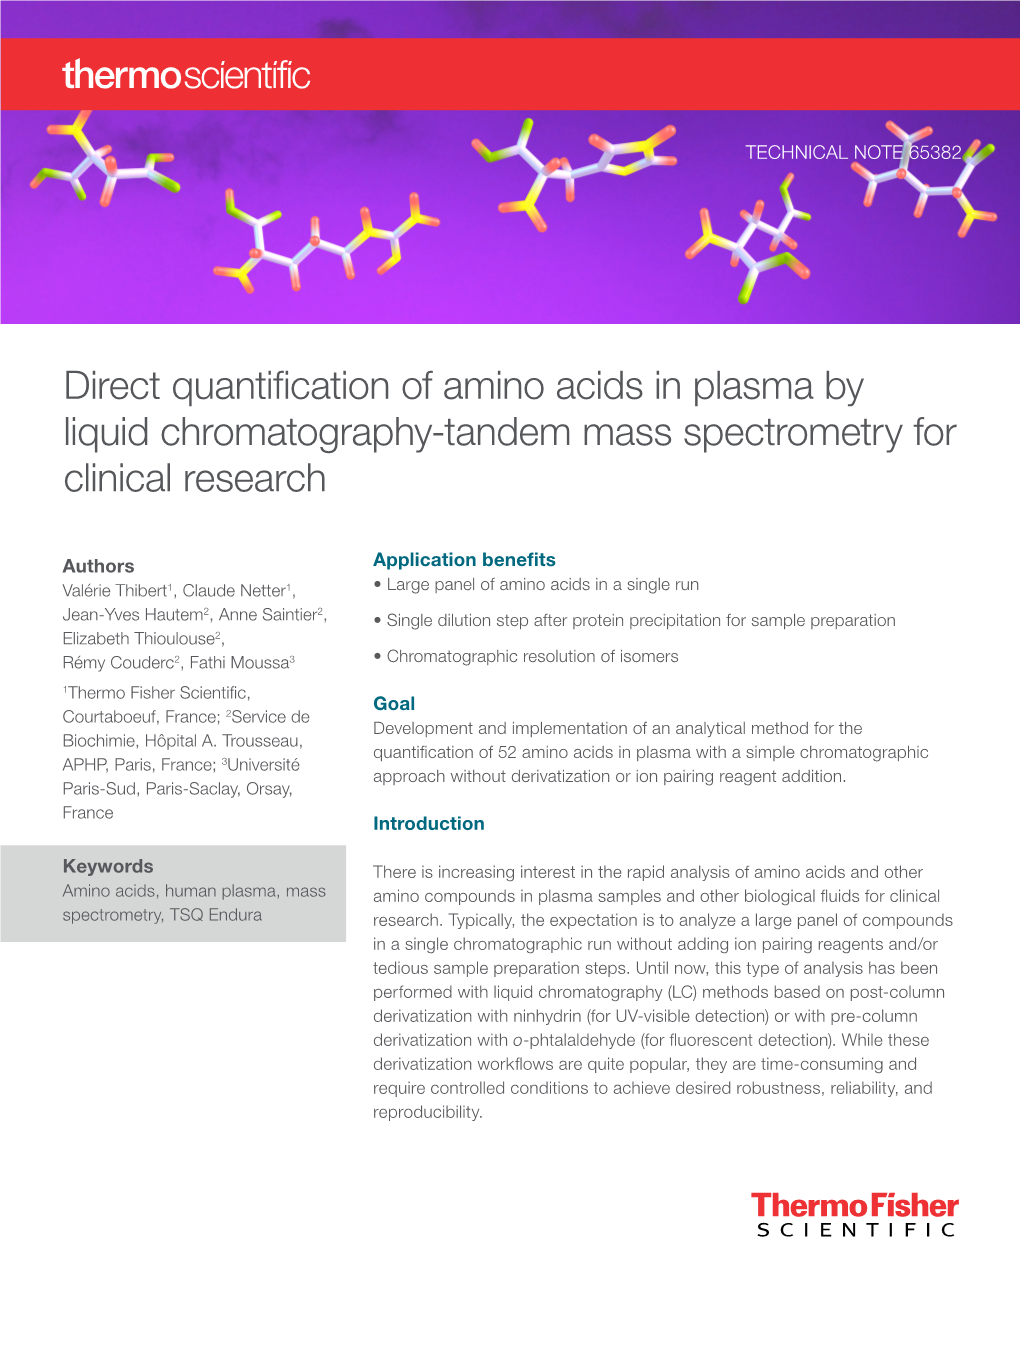 Direct Quantification of Amino Acids in Plasma by Liquid Chromatography-Tandem Mass Spectrometry for Clinical Research